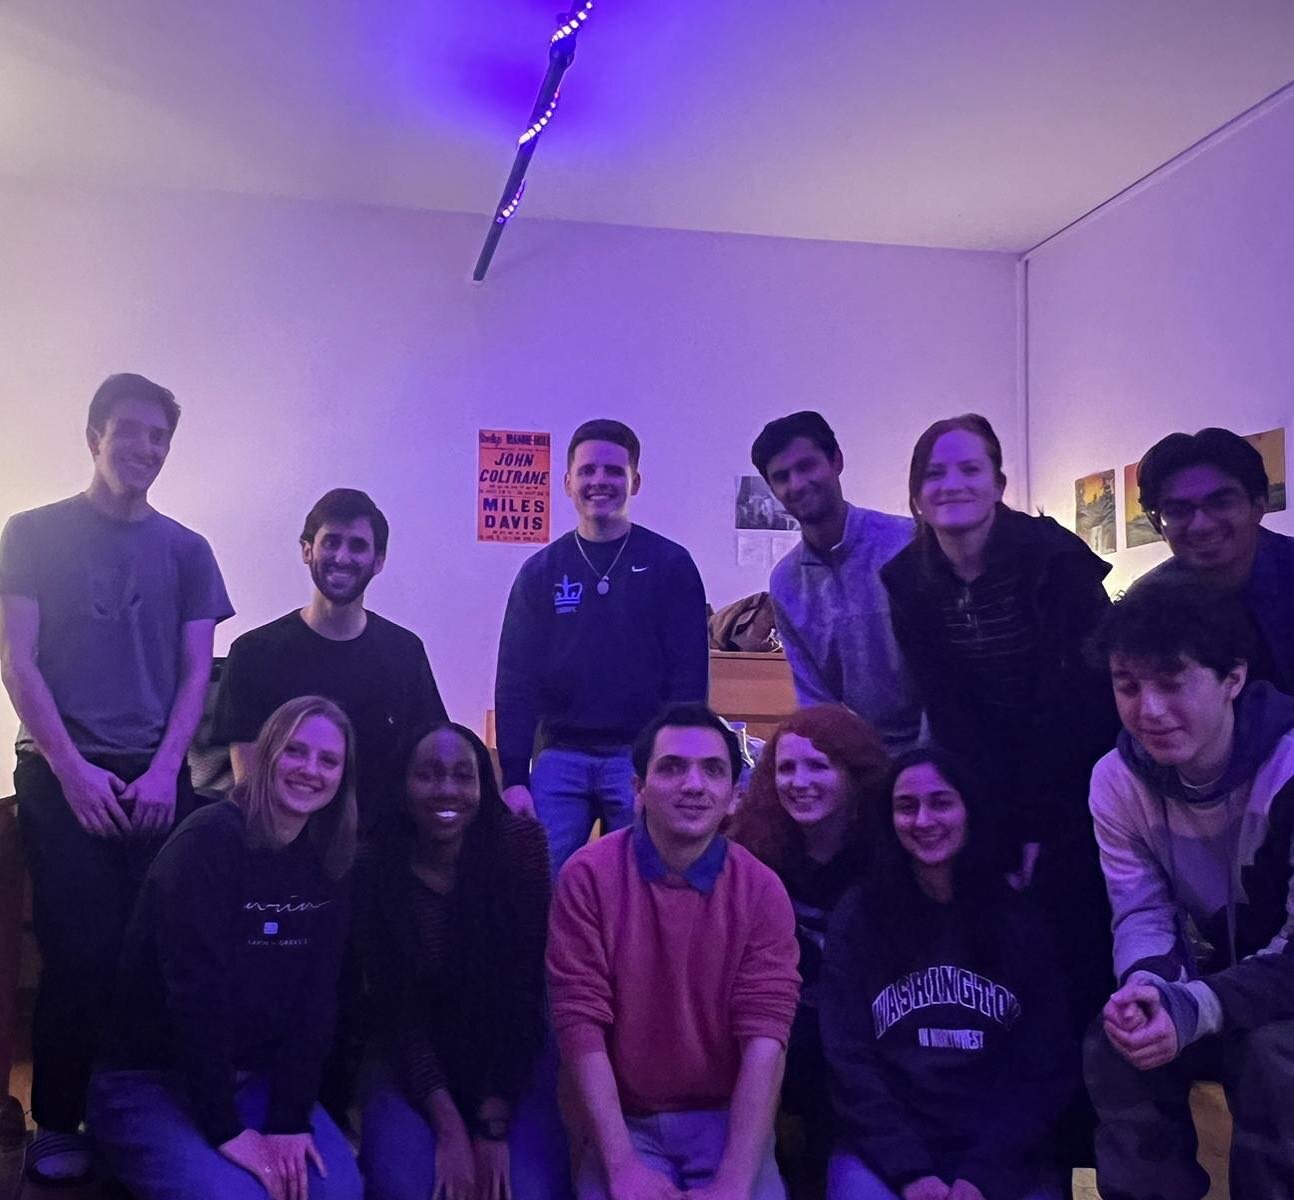 The Columbia ASAP &ldquo;After Hours&rdquo; social event was a success by every standard imaginable :) There are so many cool people on campus who actually put their money where their mouth is when it comes to being against animal abuse